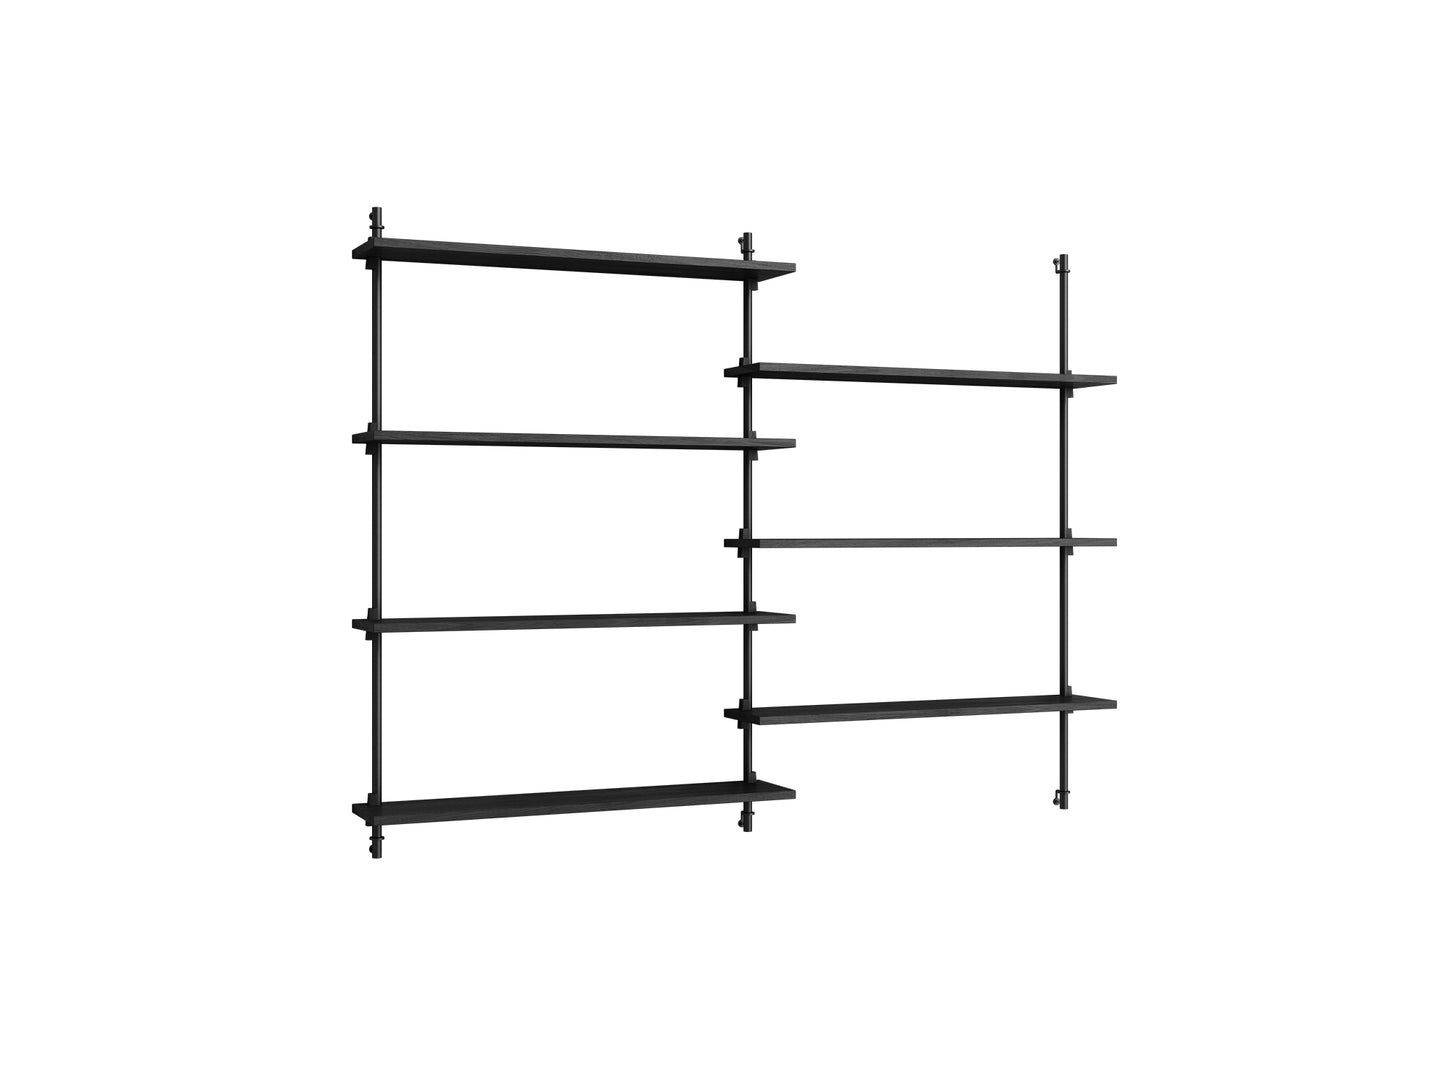 Wall Shelving System Sets (115 cm) by Moebe - WS.115.2 / Black Uprights / Black Painted Oak